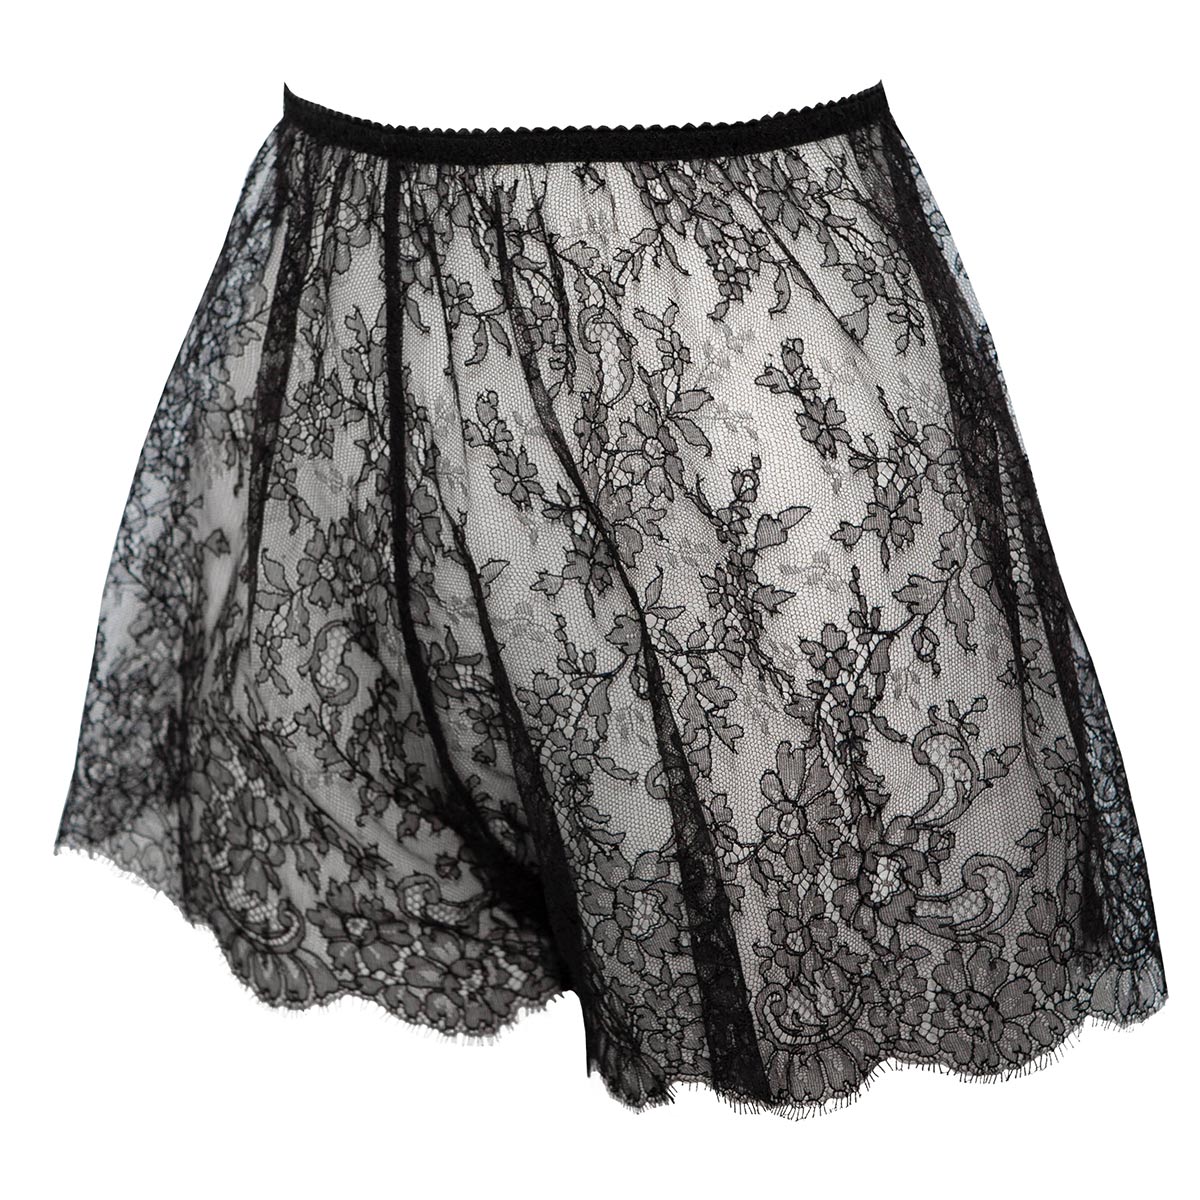 Nelisa French Chantilly Lace Tap Pants